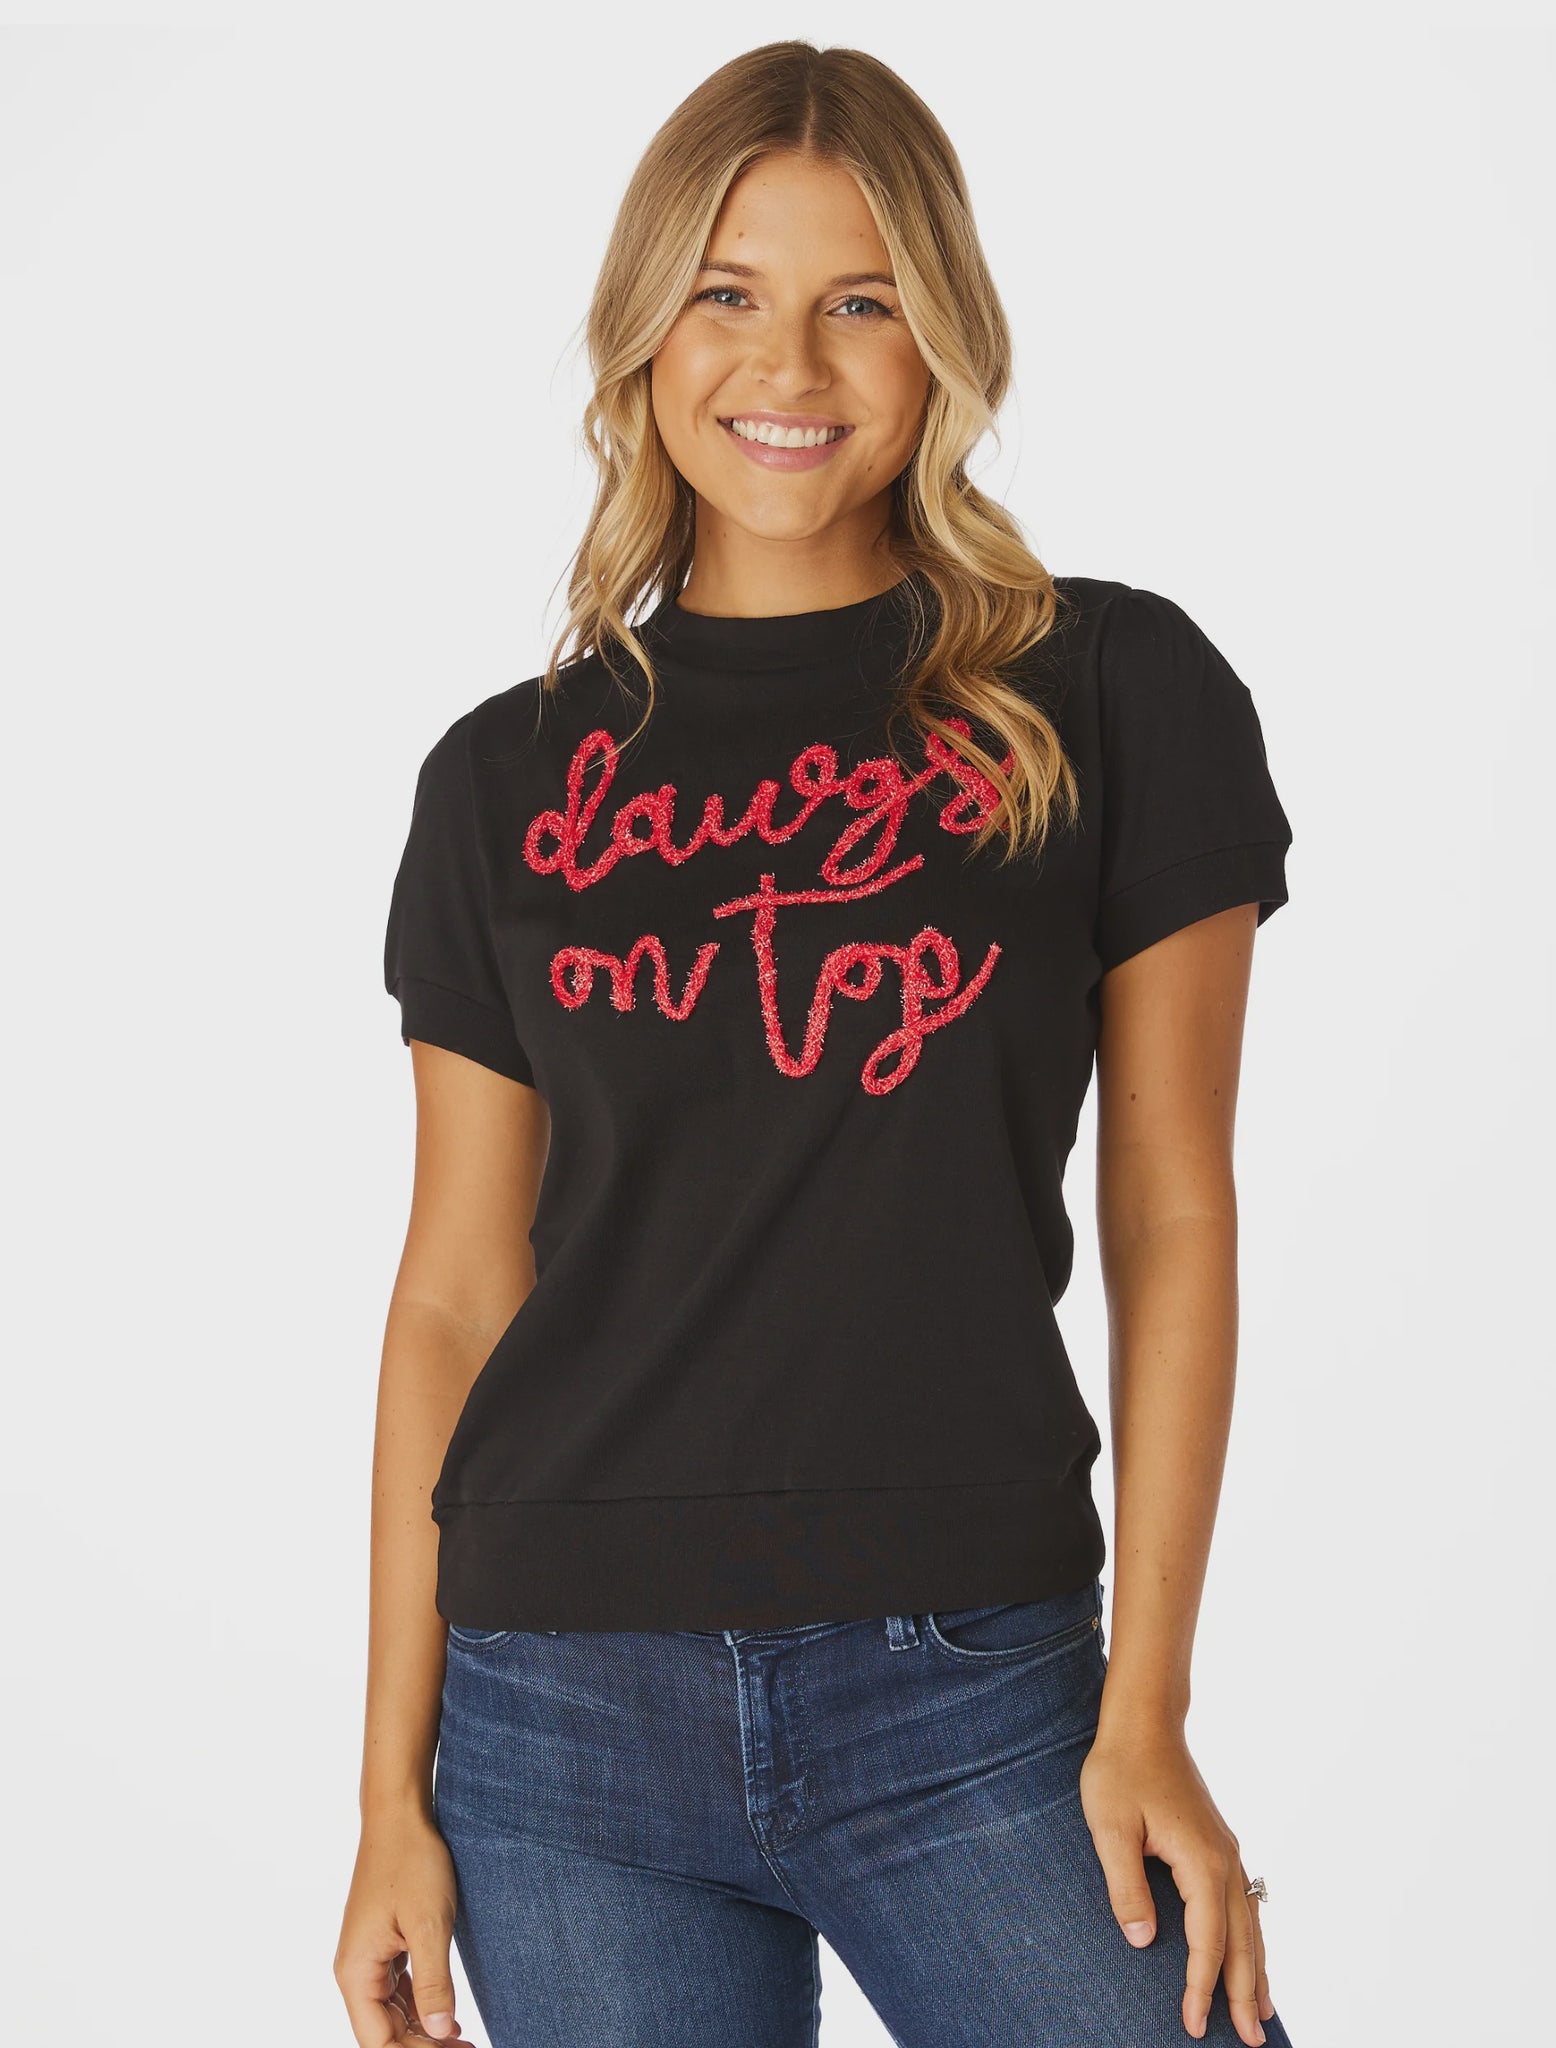 The Dawgs On Top Shirt